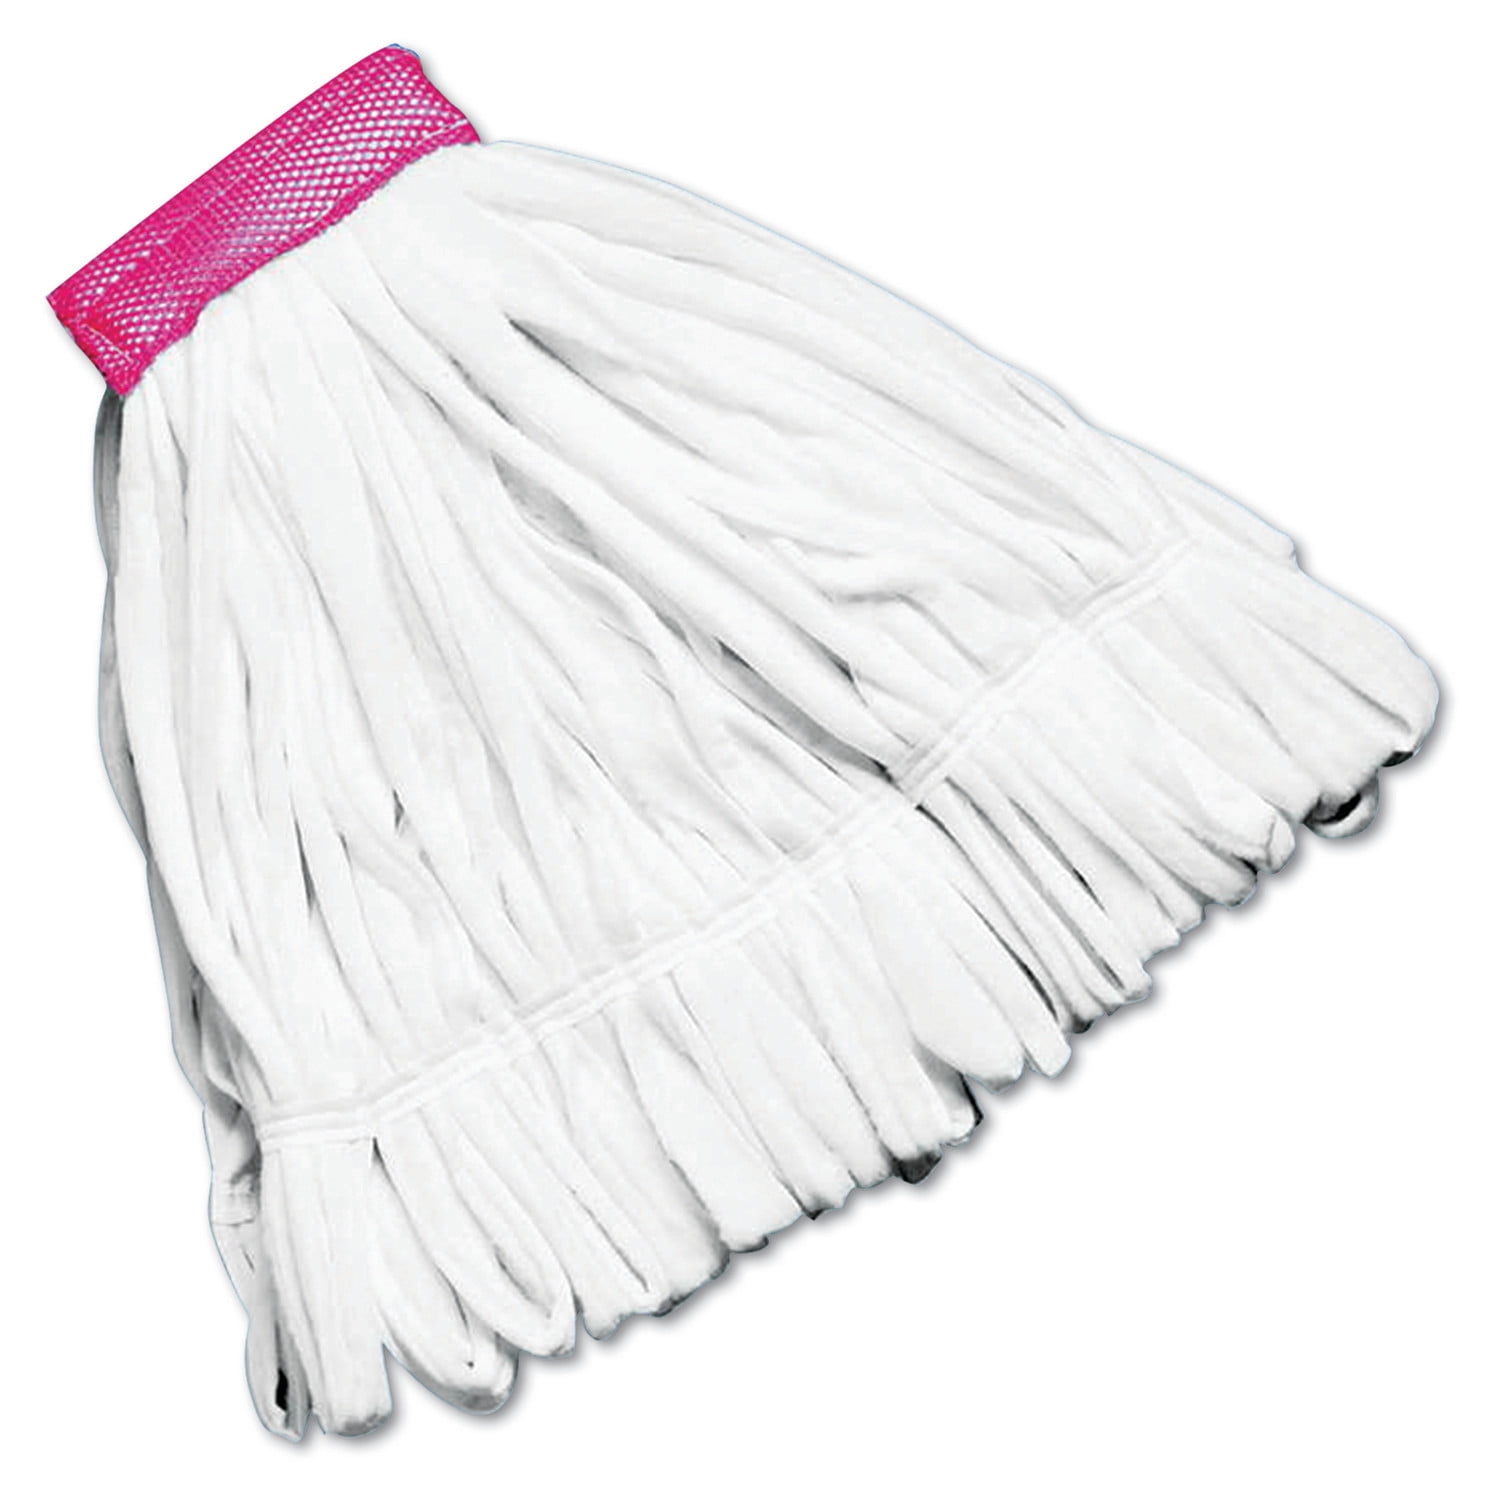 Medium Rough Floor Looped-End Cotton/Synthetic Wet Mop Head 12/Pack White 